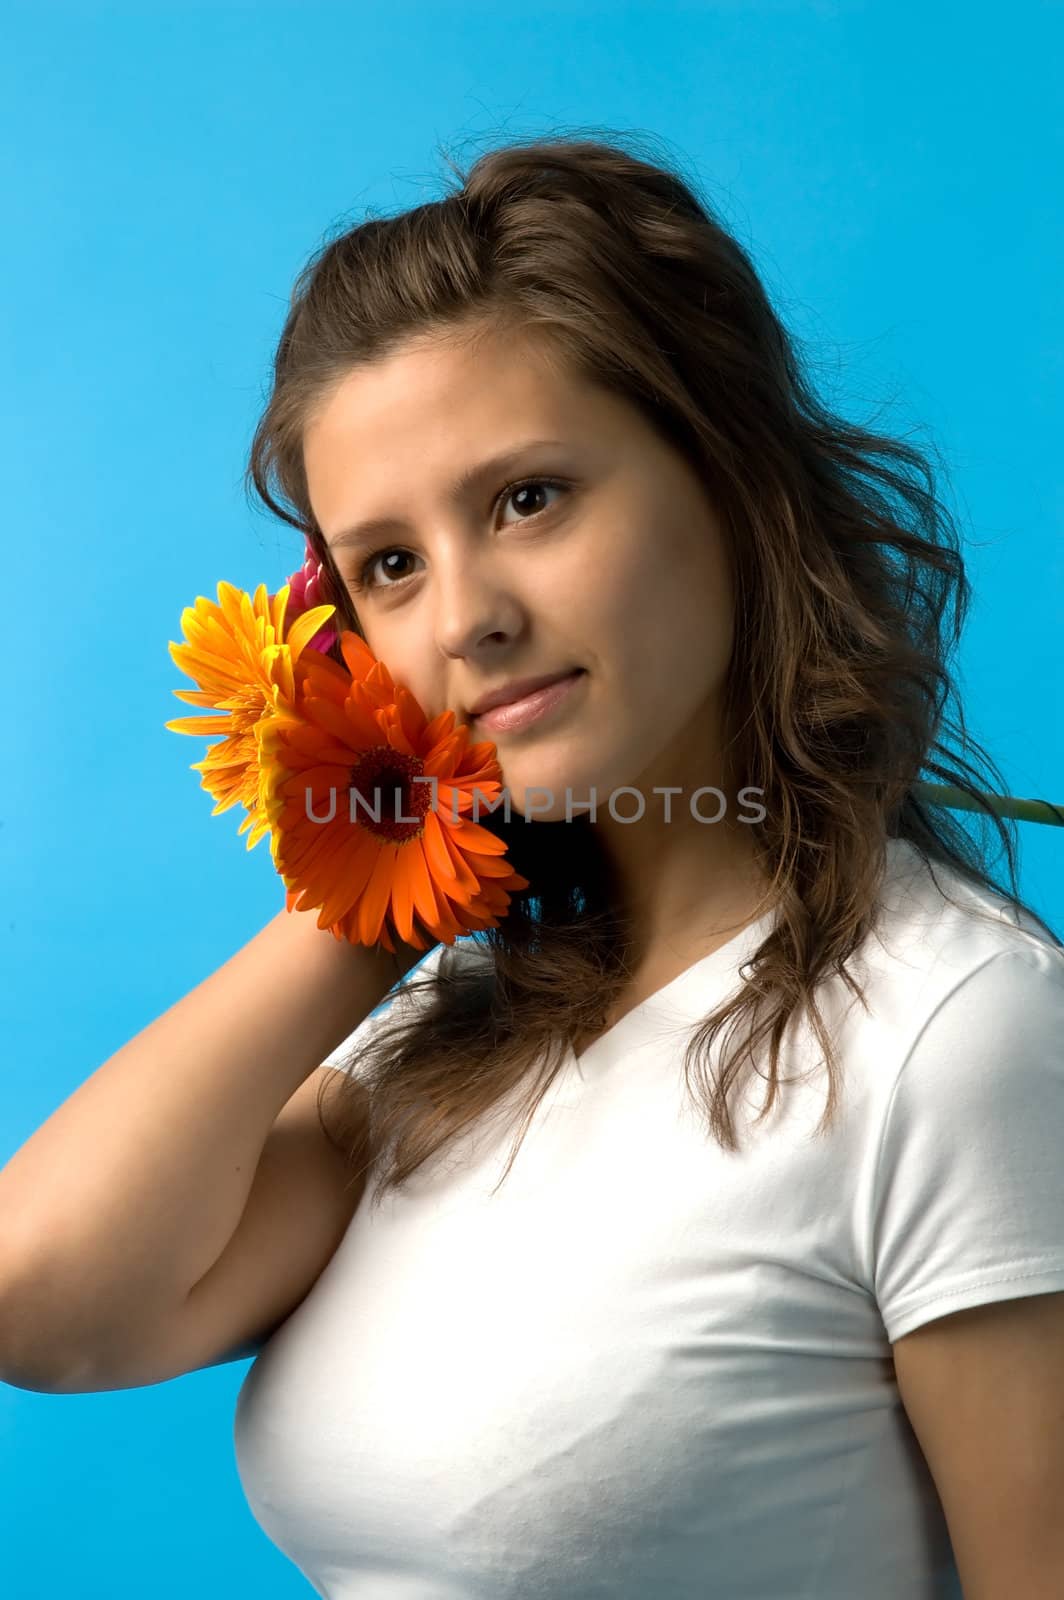 The girl with brown eyes and a bouquet of flowers